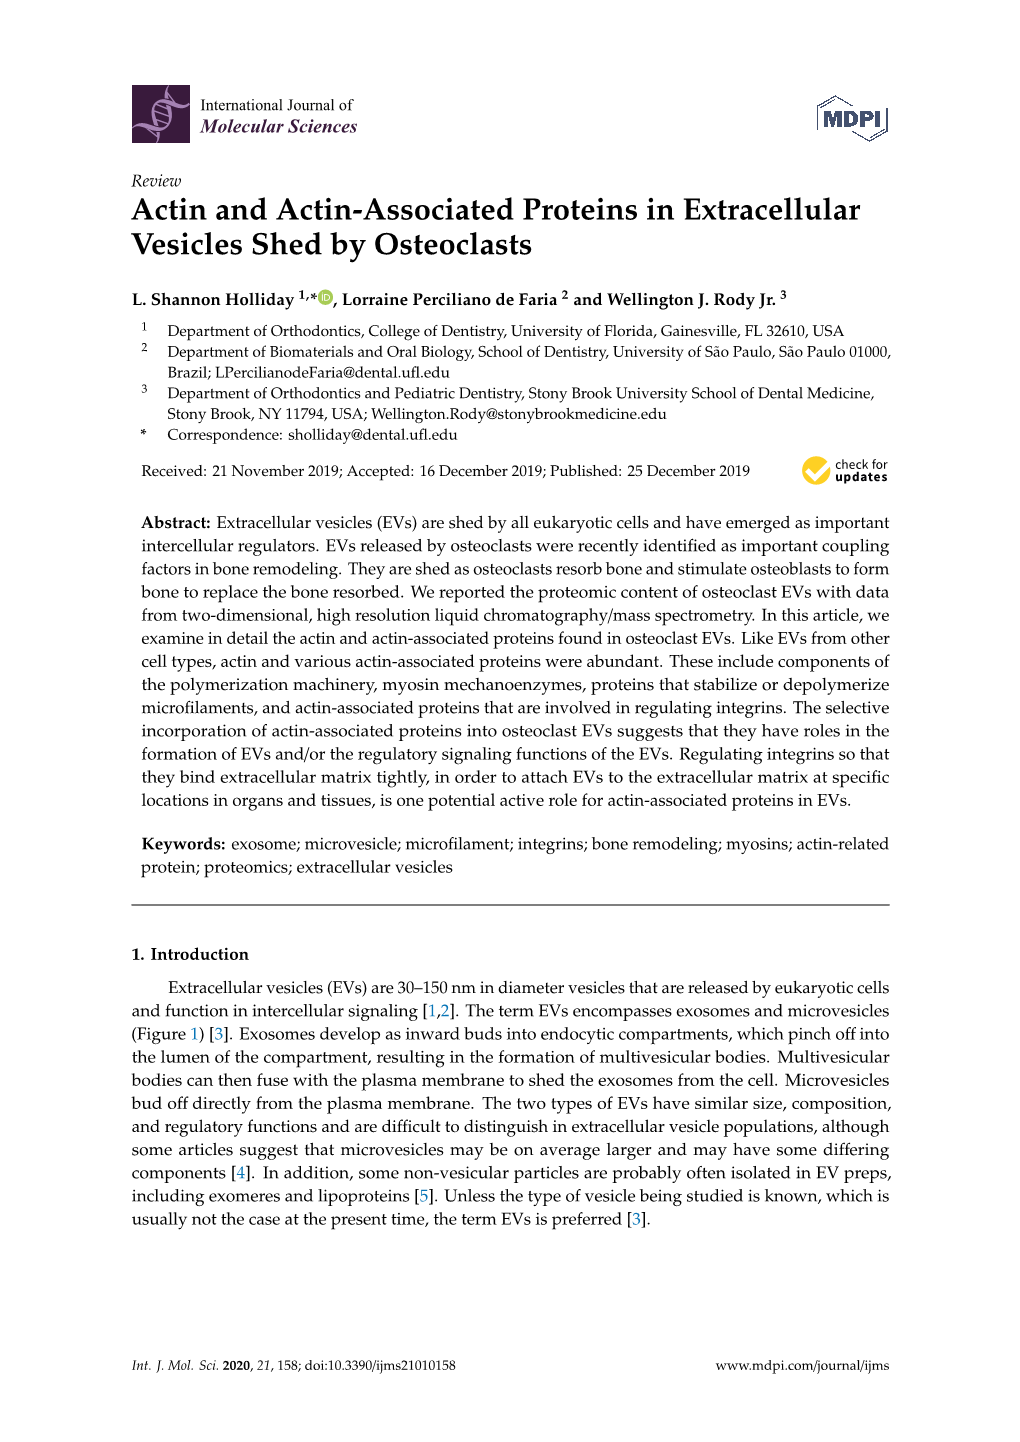 Actin and Actin-Associated Proteins in Extracellular Vesicles Shed by Osteoclasts